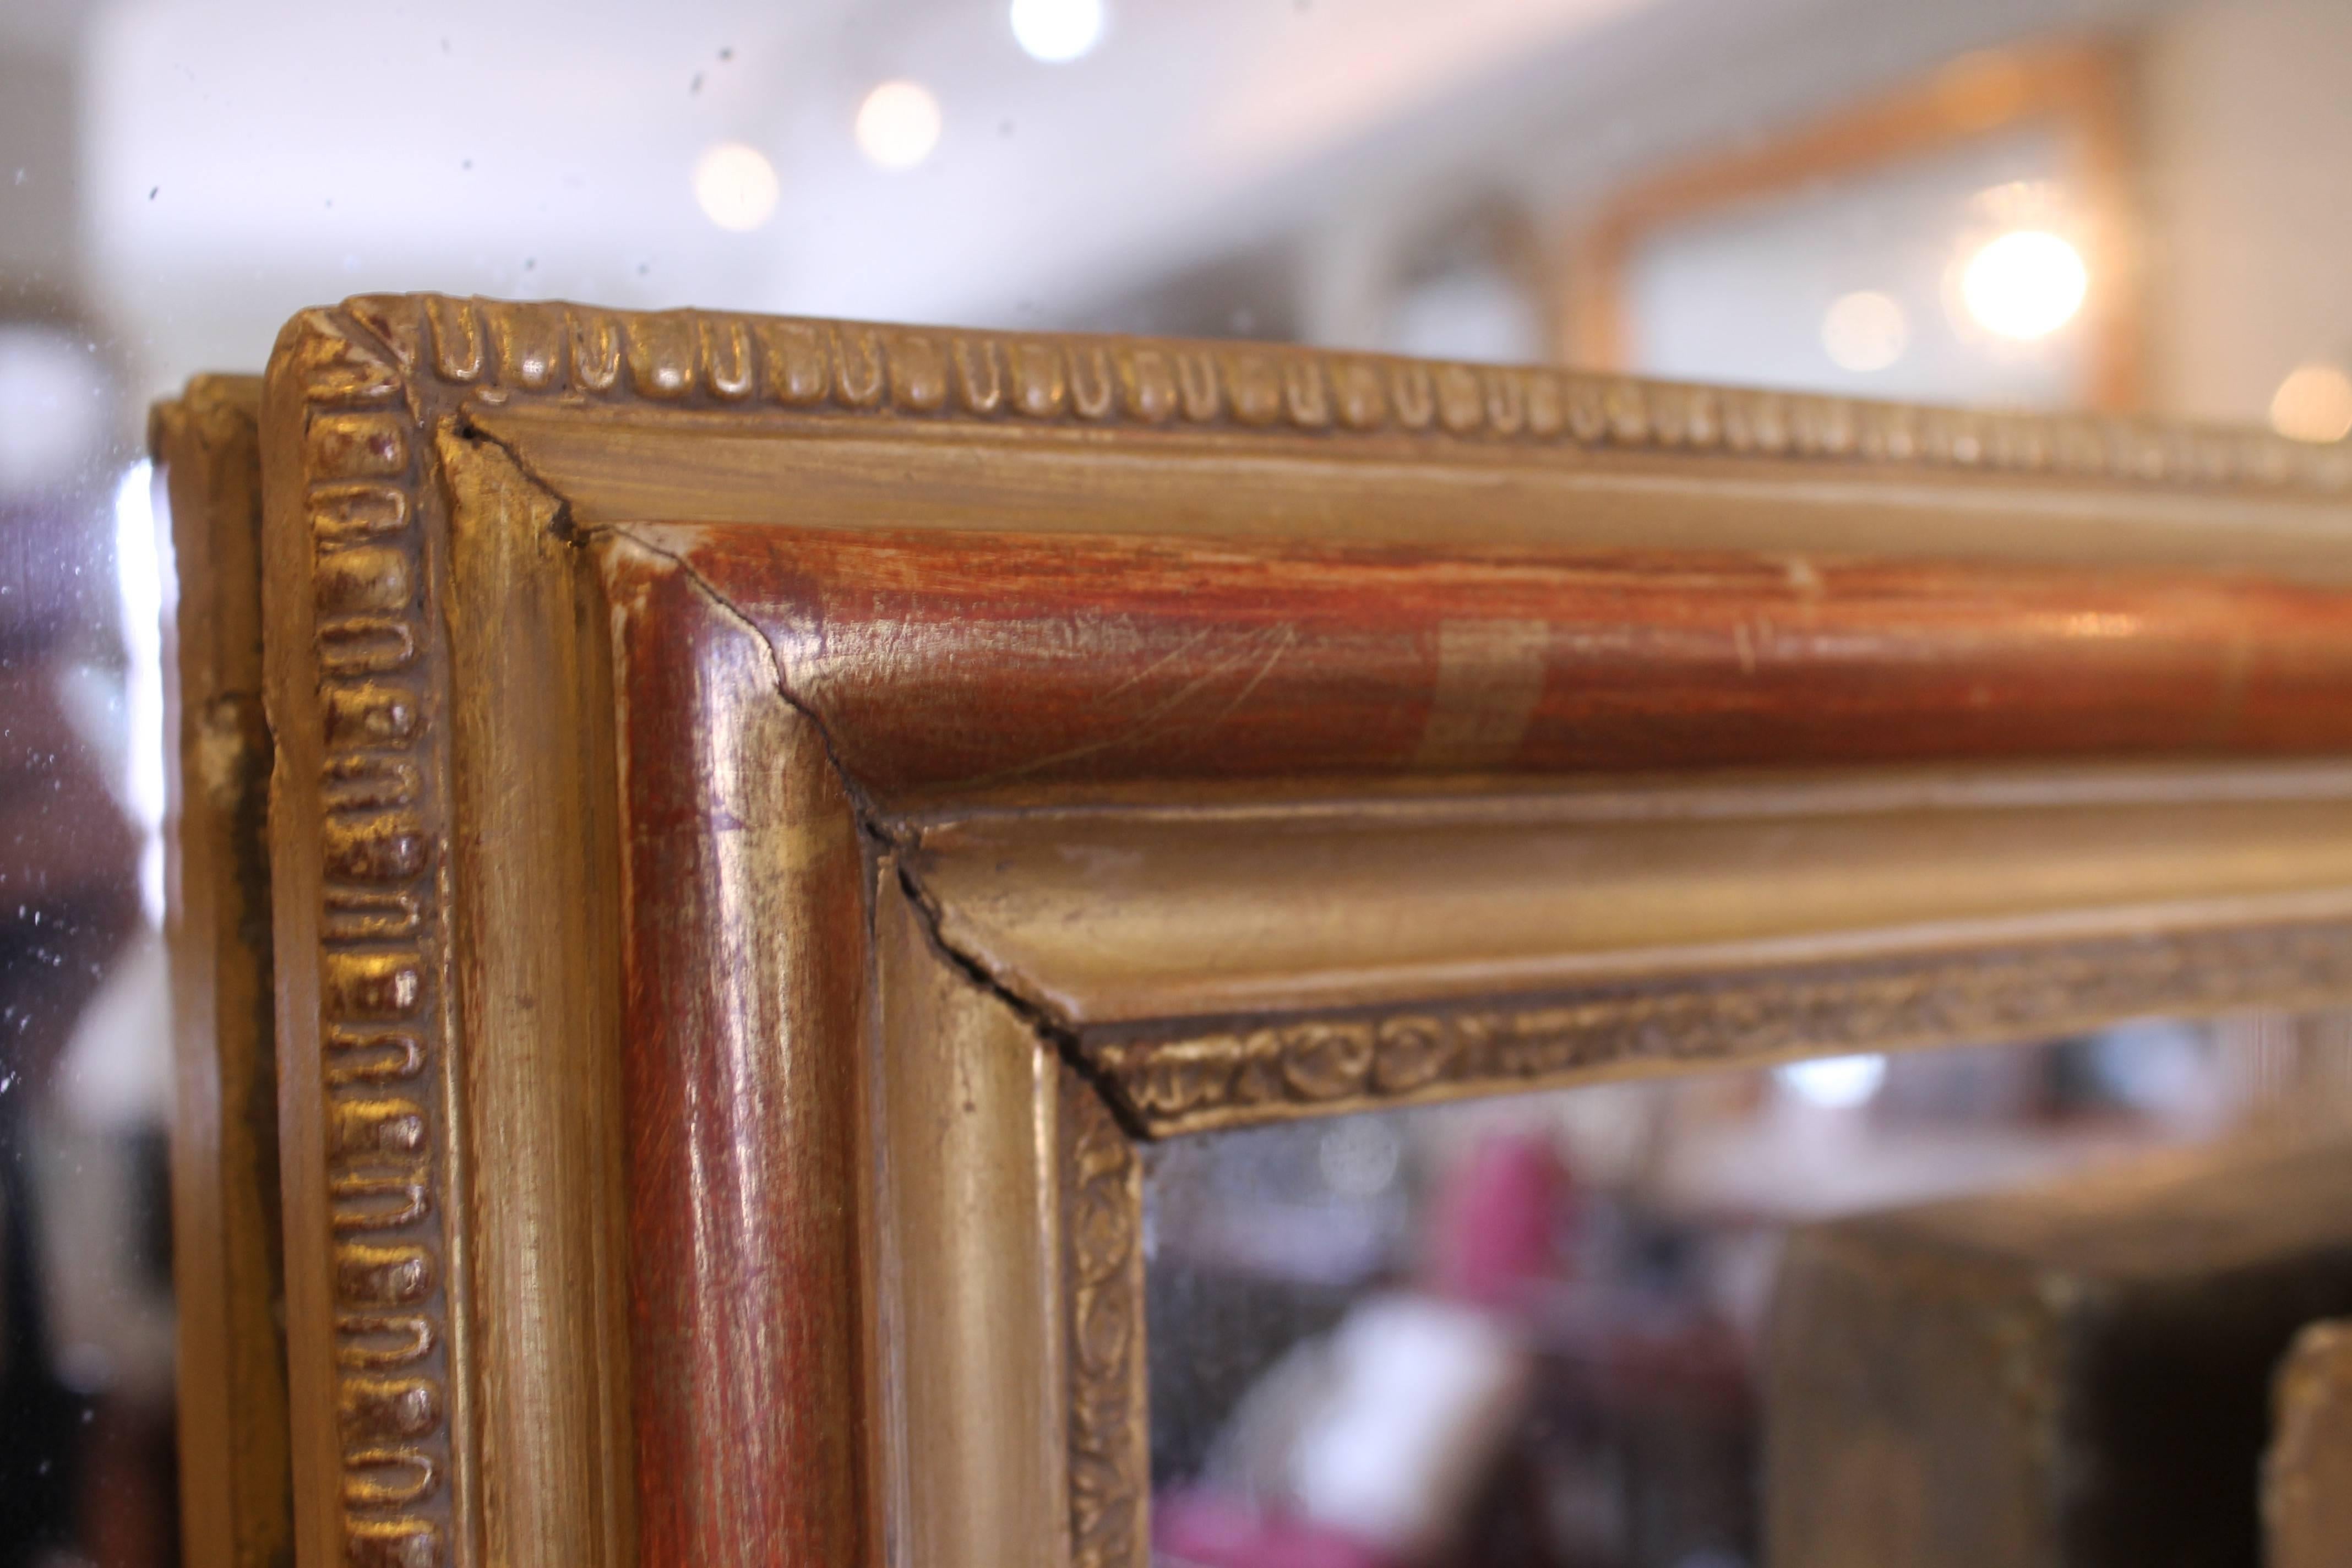 An excellent French mirror of useful size with good proportions to the design. The gilding has a pleasant evenly worn appearance with fine quality applied composition castings to the front and back edges, with a lovely warm, worn main burnished